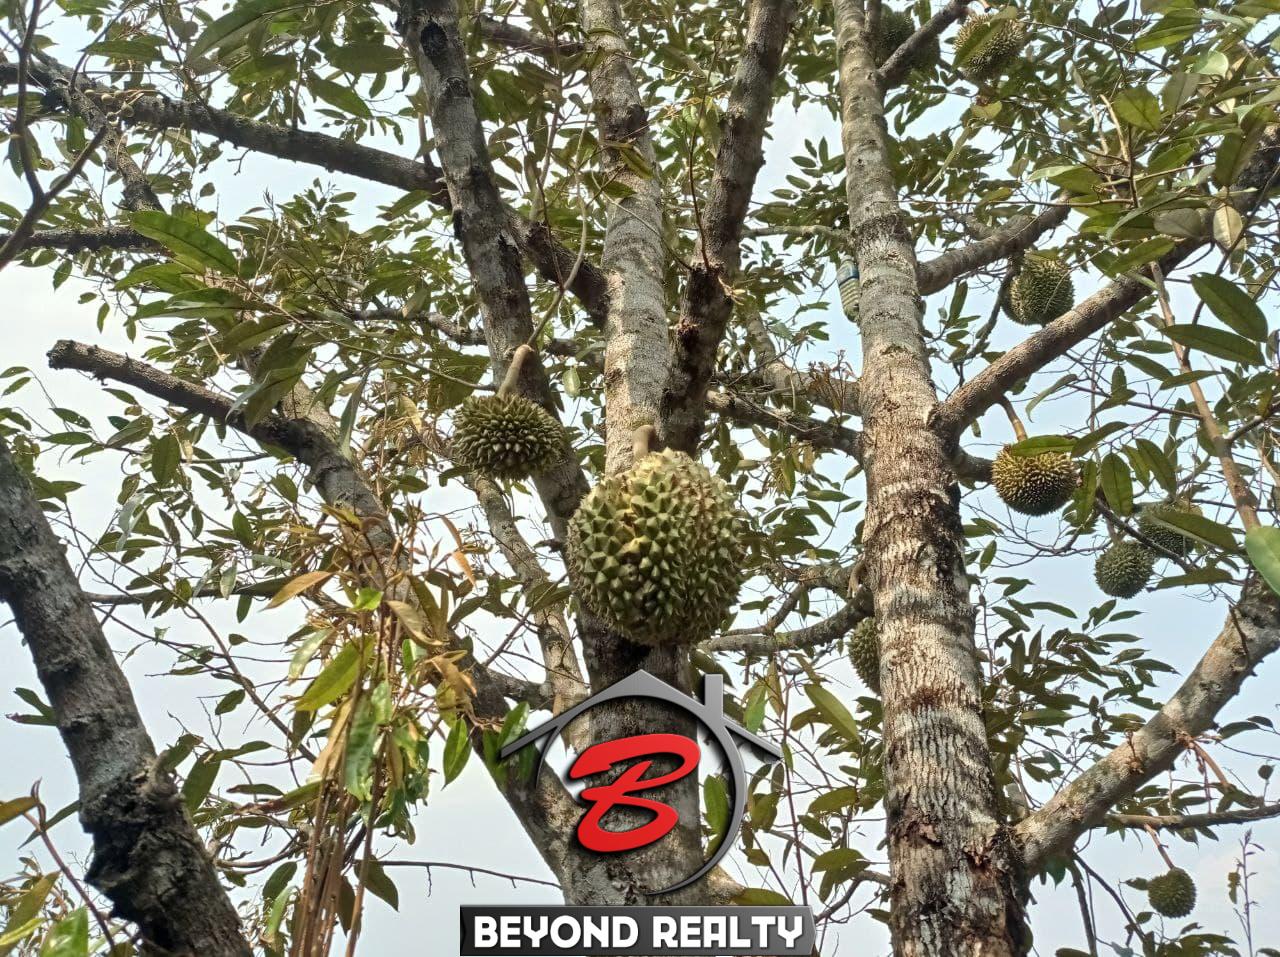 a jackfruit tree at the land for sale in Srae Ambel